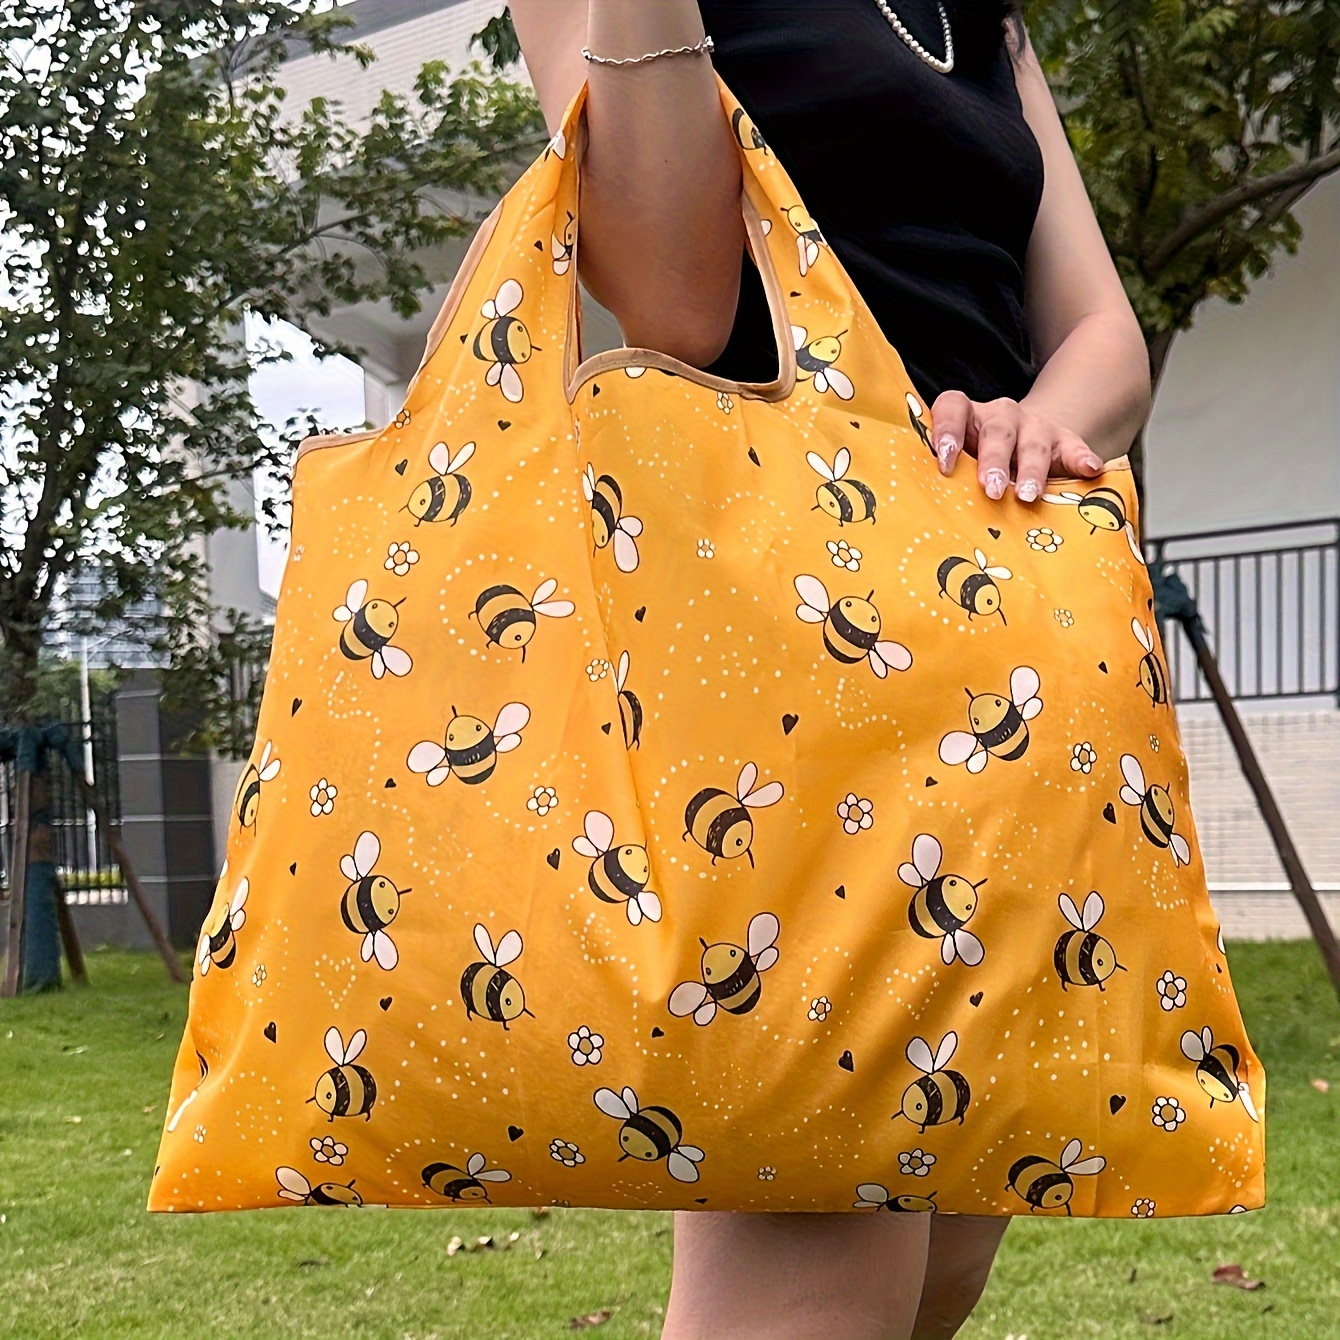 

Large Capacity Portable Shopping Bag, Lightweight Grocery Bag, Cartoon Bee Pattern Foldable Tote Bag